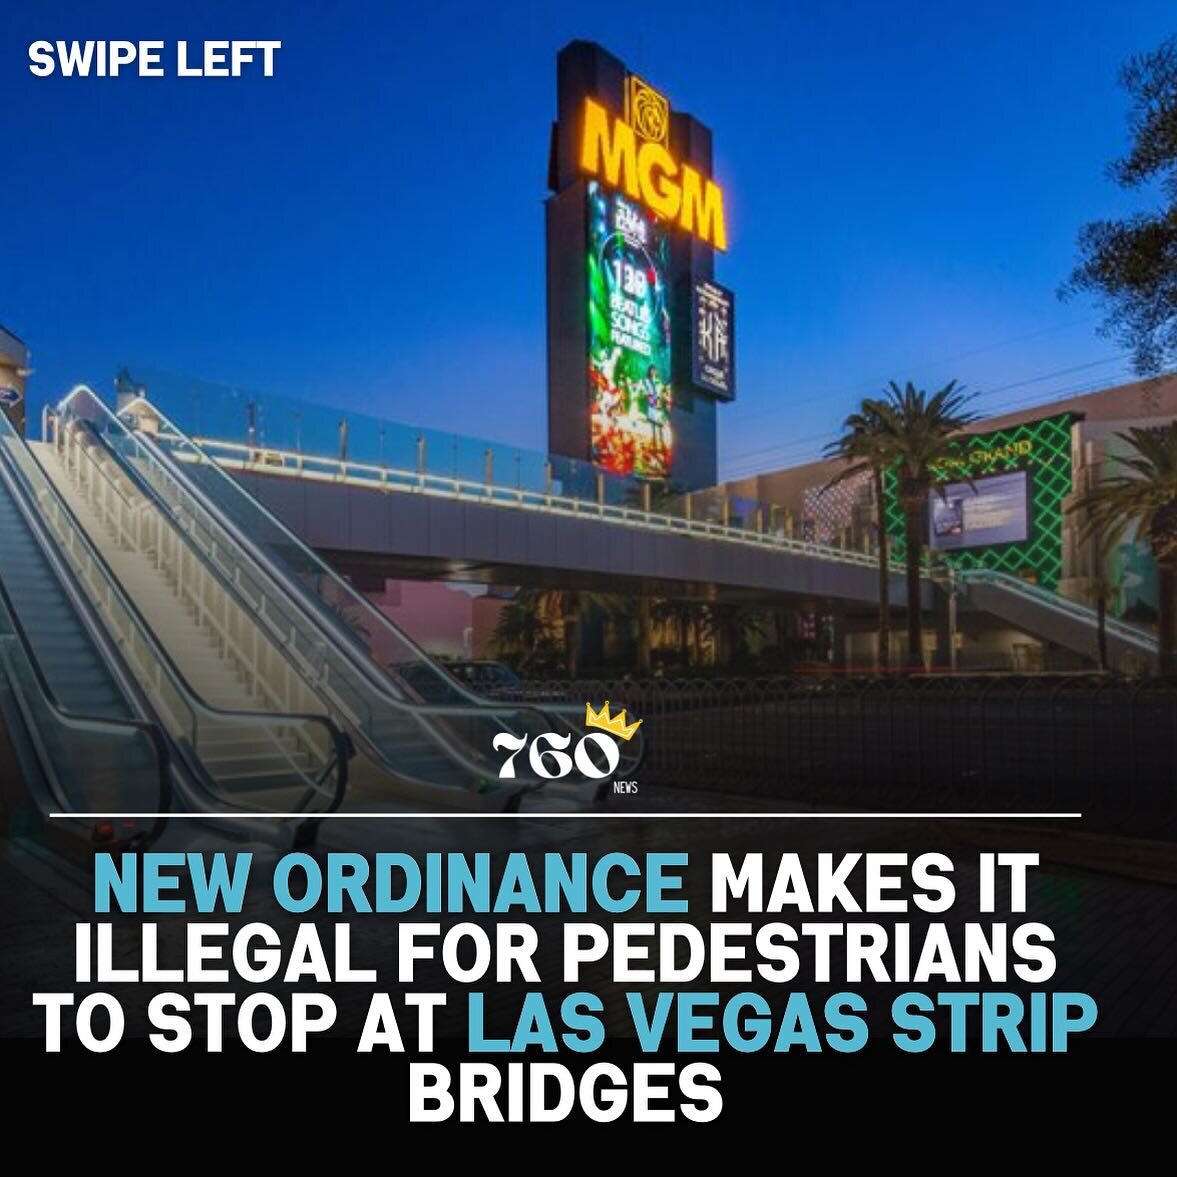 For the full story, please view my story or copy and paste the link below

Full story: https://www.760news.org/other-stories/new-ordinance-makes-it-illegal-for-pedestrians-to-stop-at-las-vegas-strip-bridges

#LasVegasStrip #PedestrianOrdinance #Publi